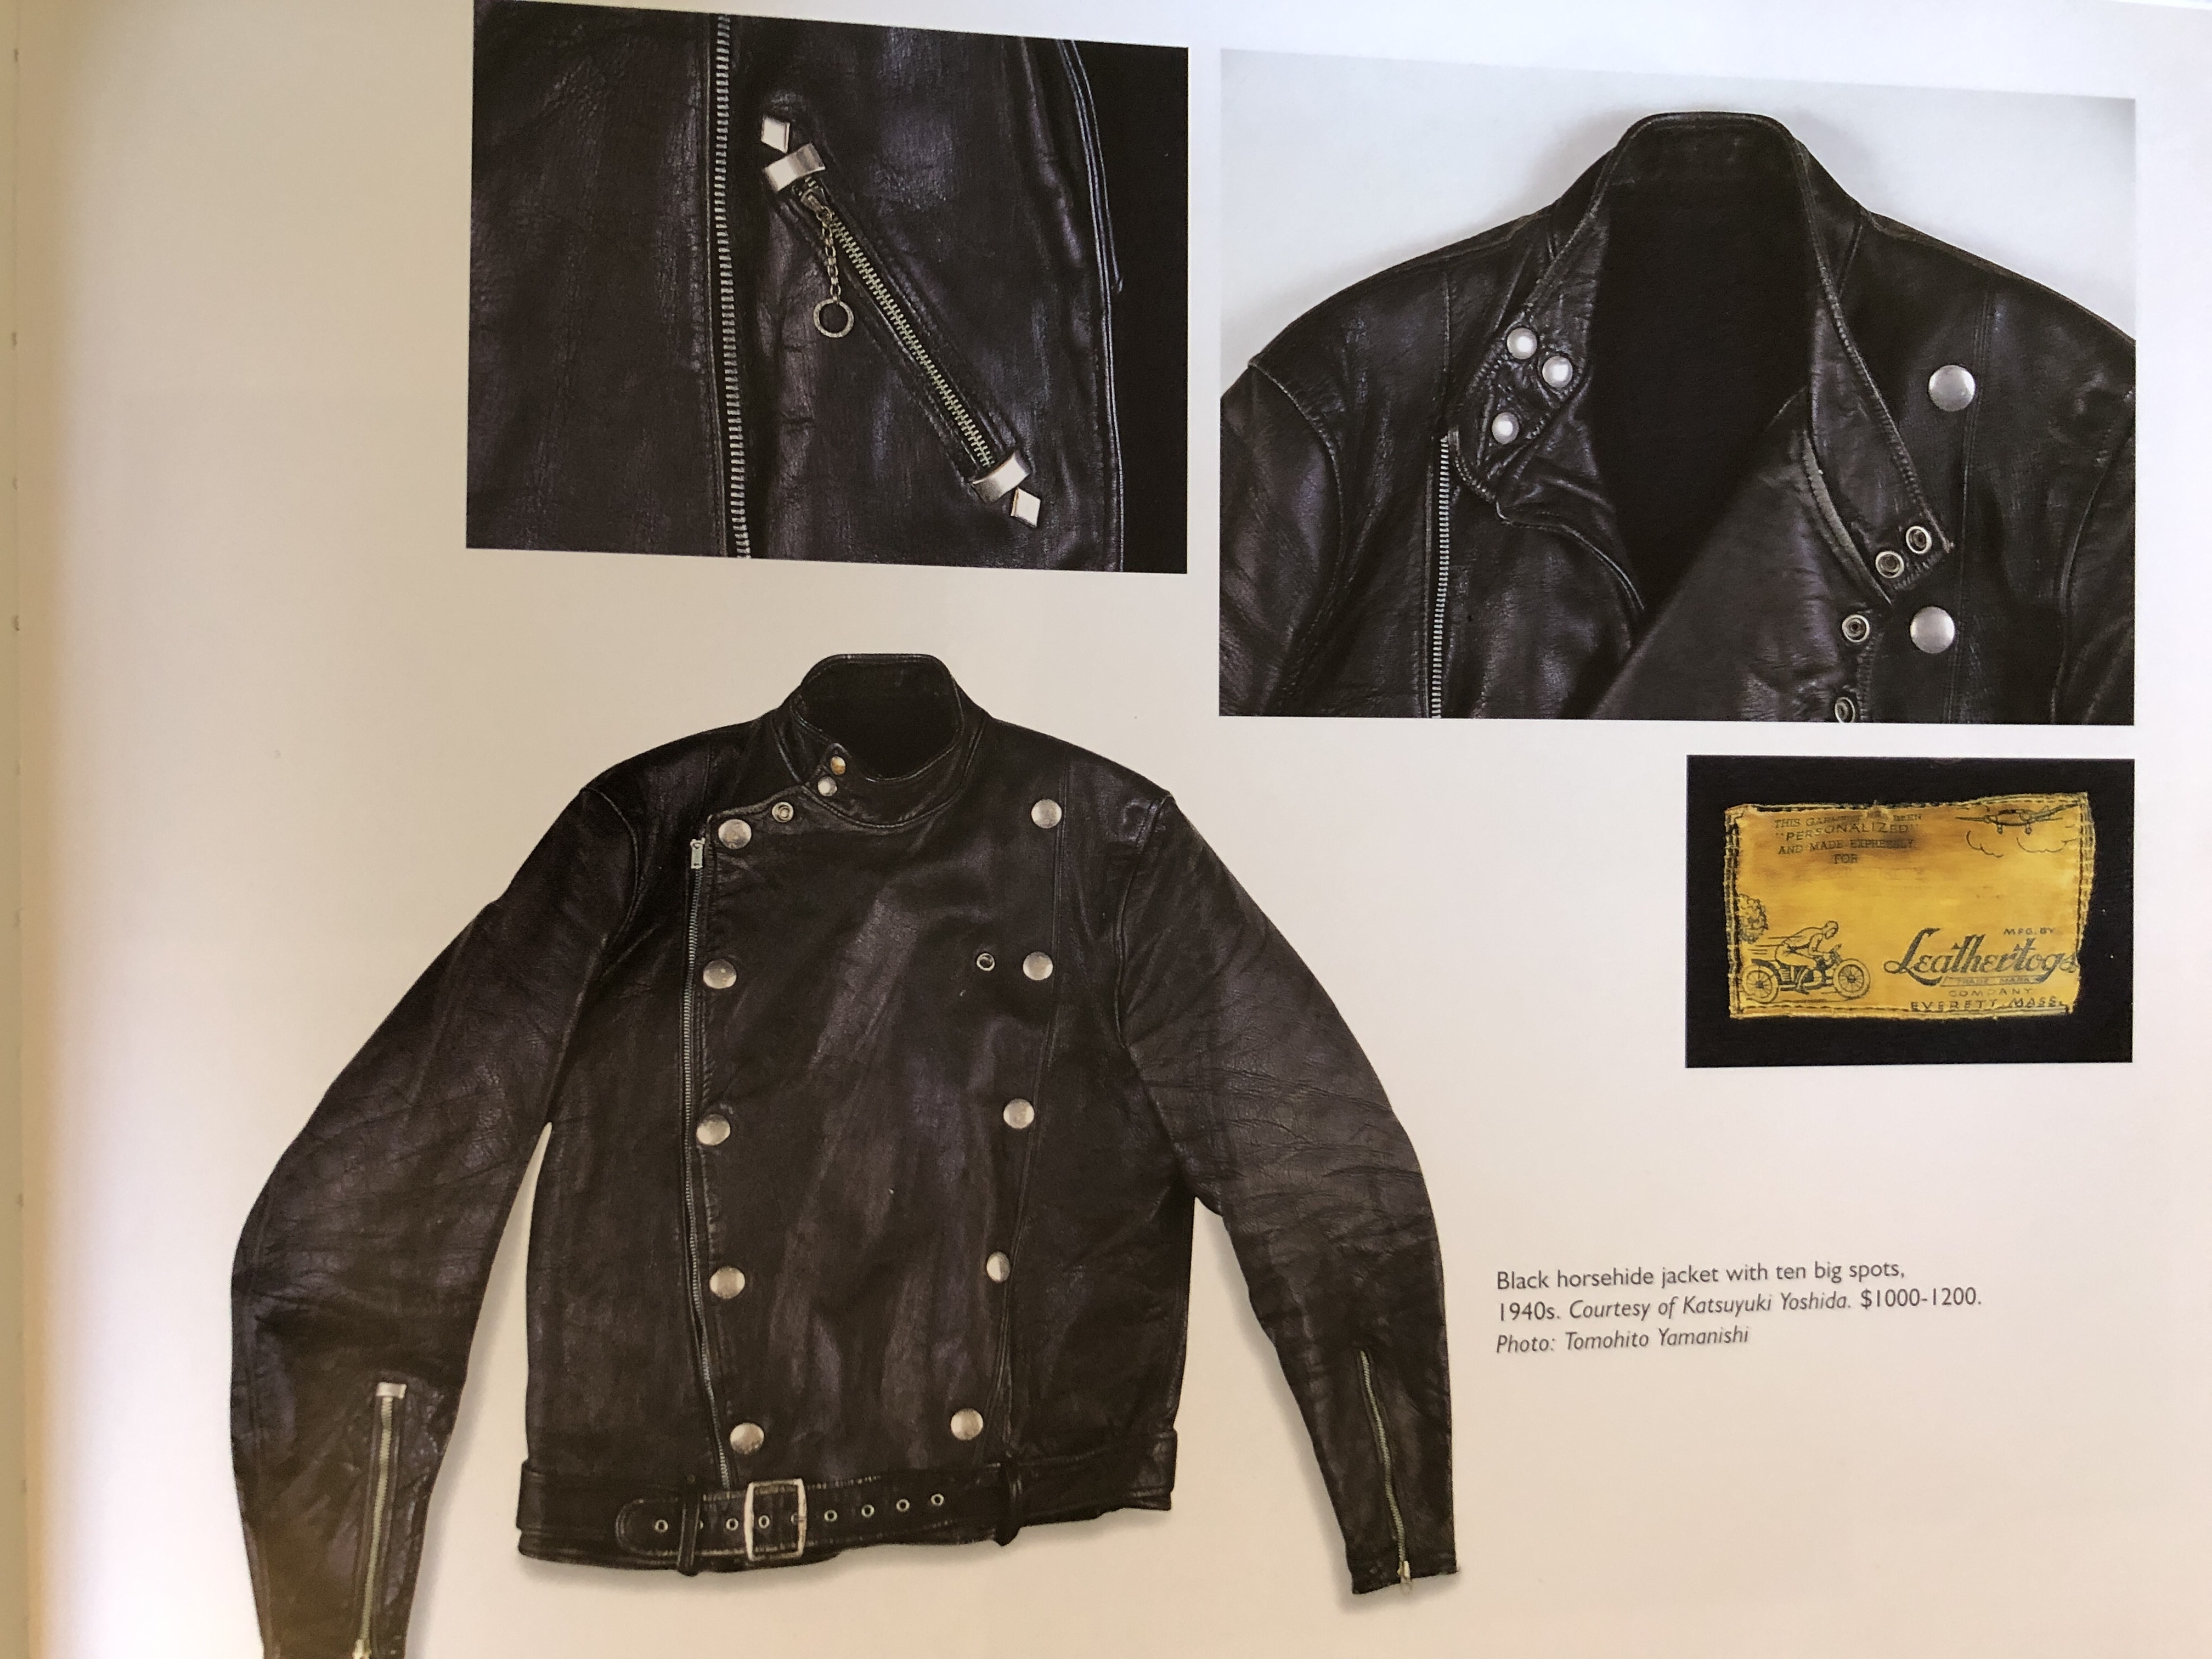 Five Star Leather Jackets, Page 364